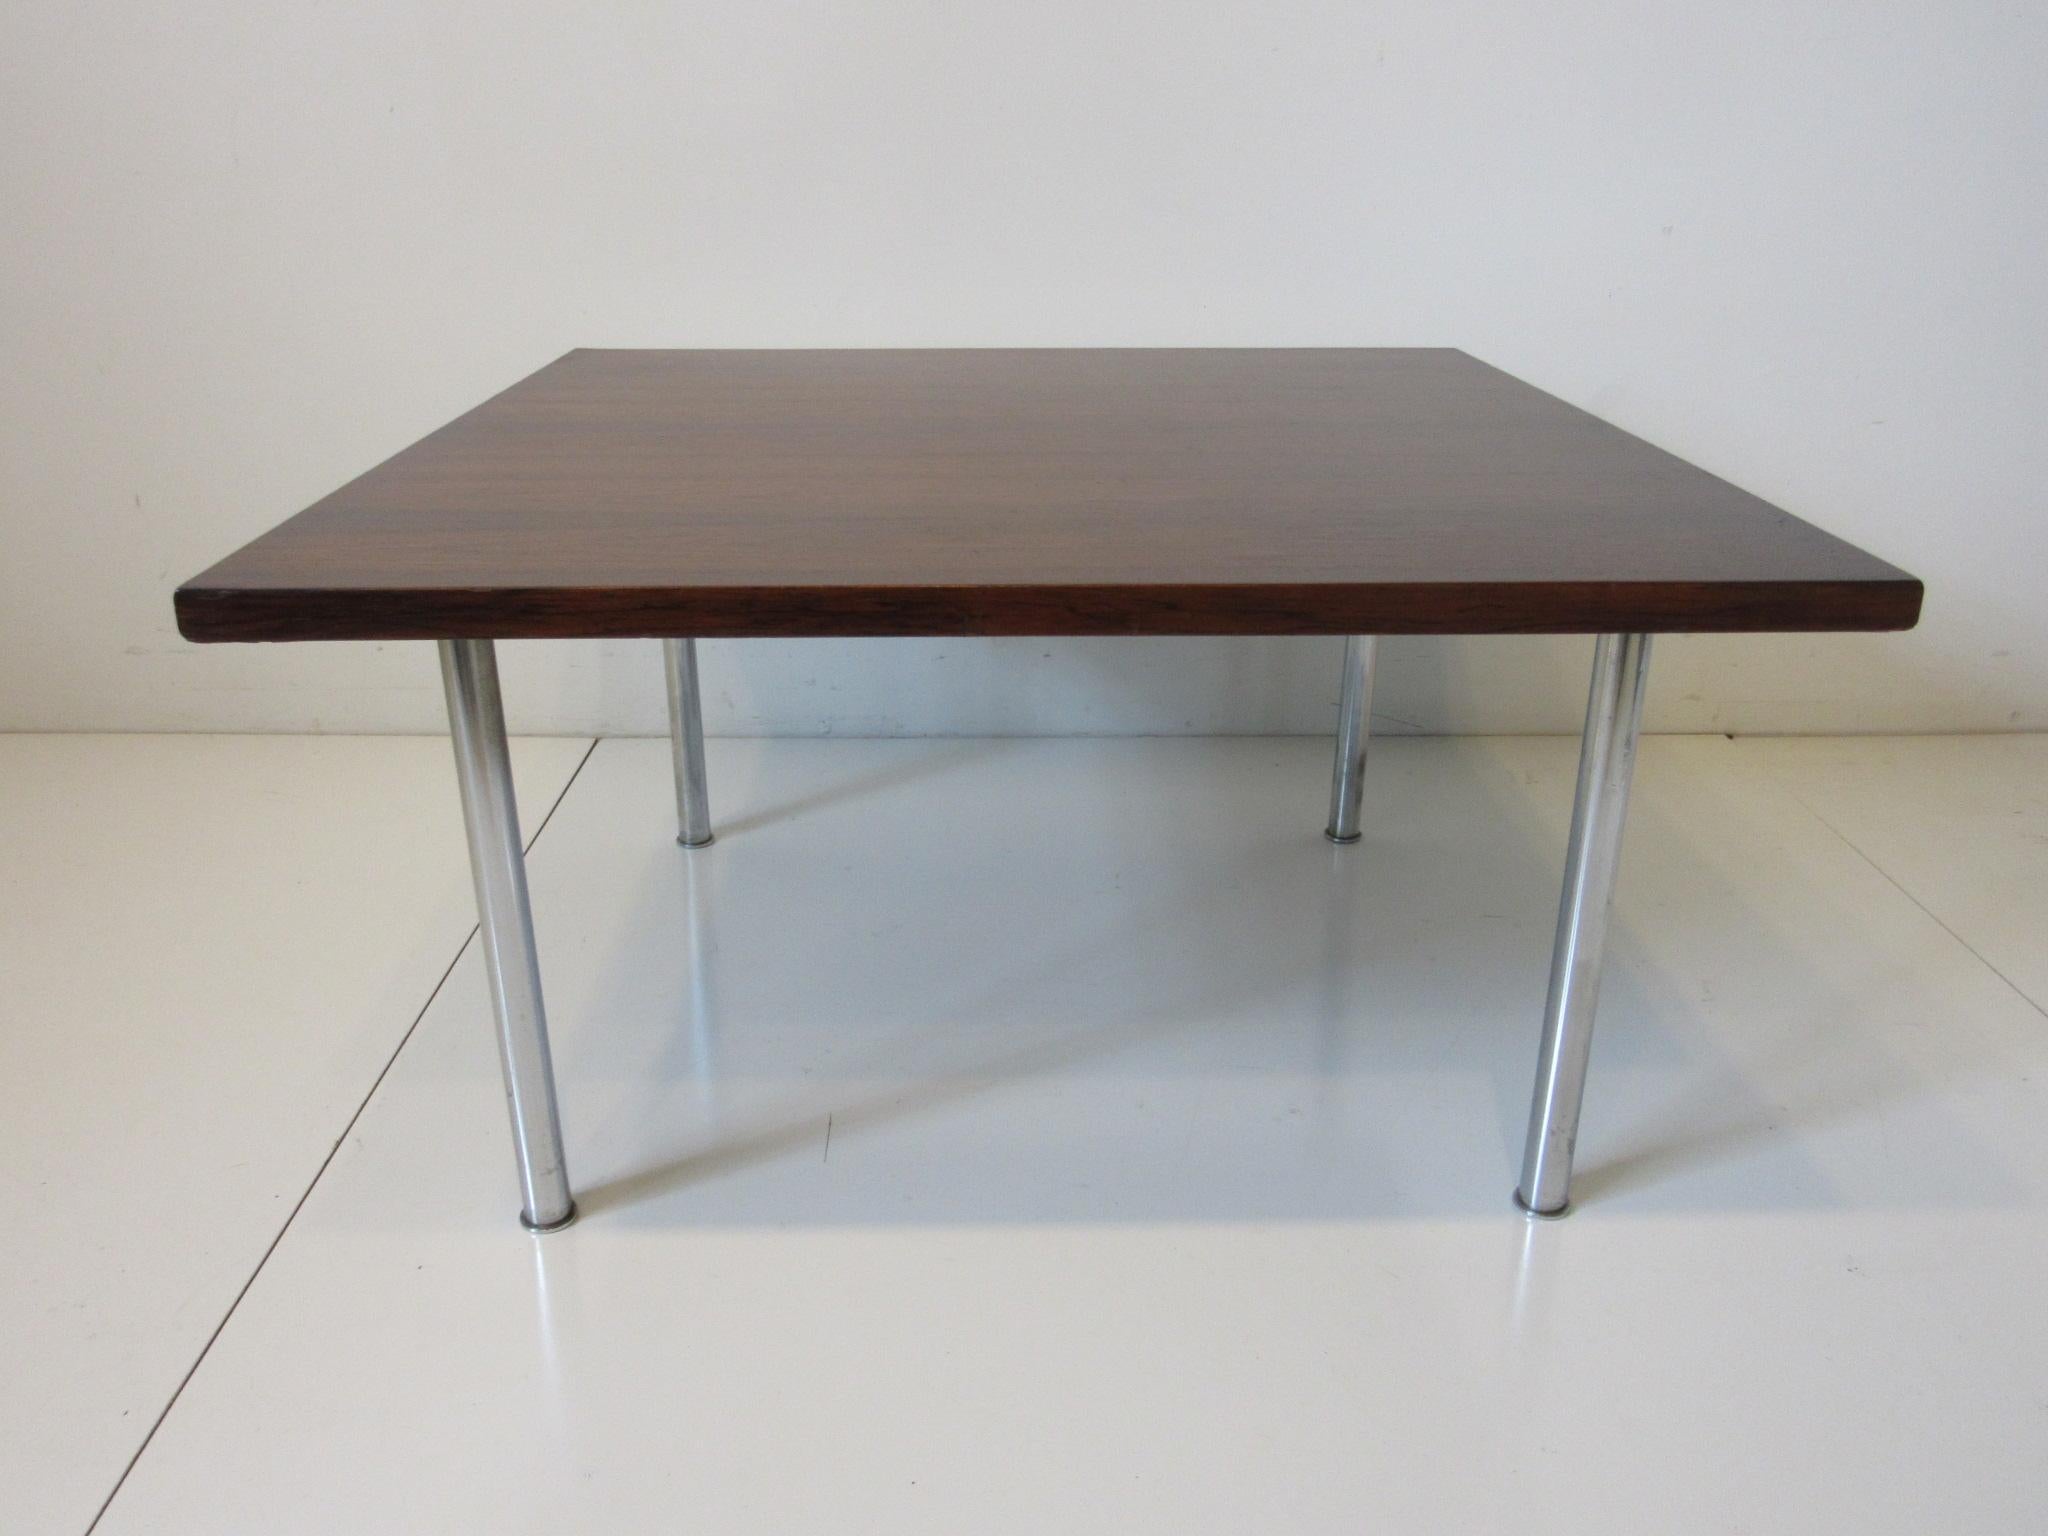 A rich and well grained dark Brazilian rosewood square coffee table with chromed nickeled legs . Retains the original manufactures label designed by Bodil Kjaer for E. Pedersen and Sons a/s made in Denmark.